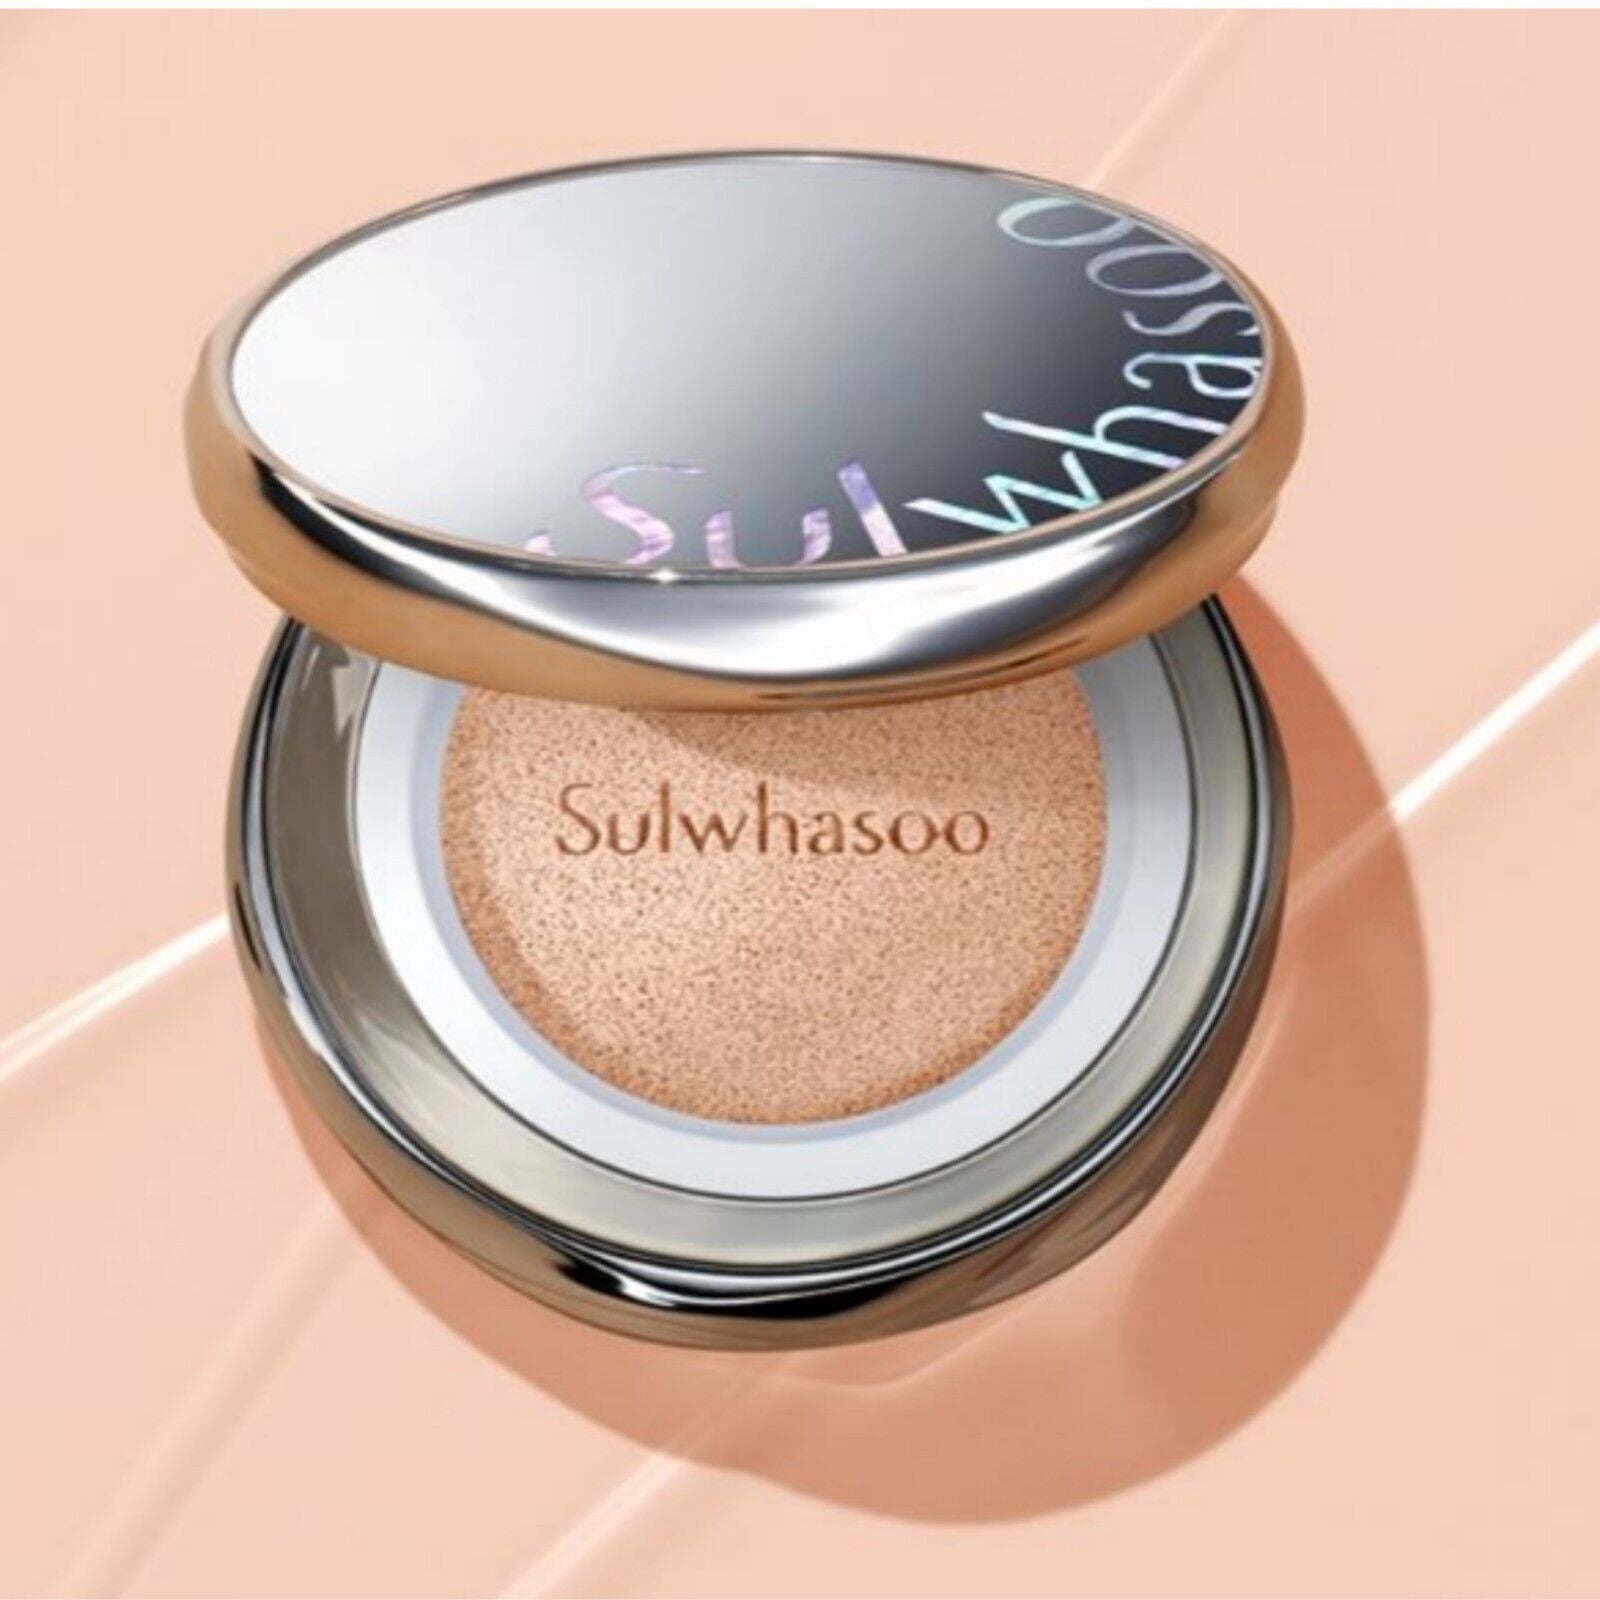 Sulwhasoo Perfecting Cushion Airy 15g Only Refill - DODOSKIN